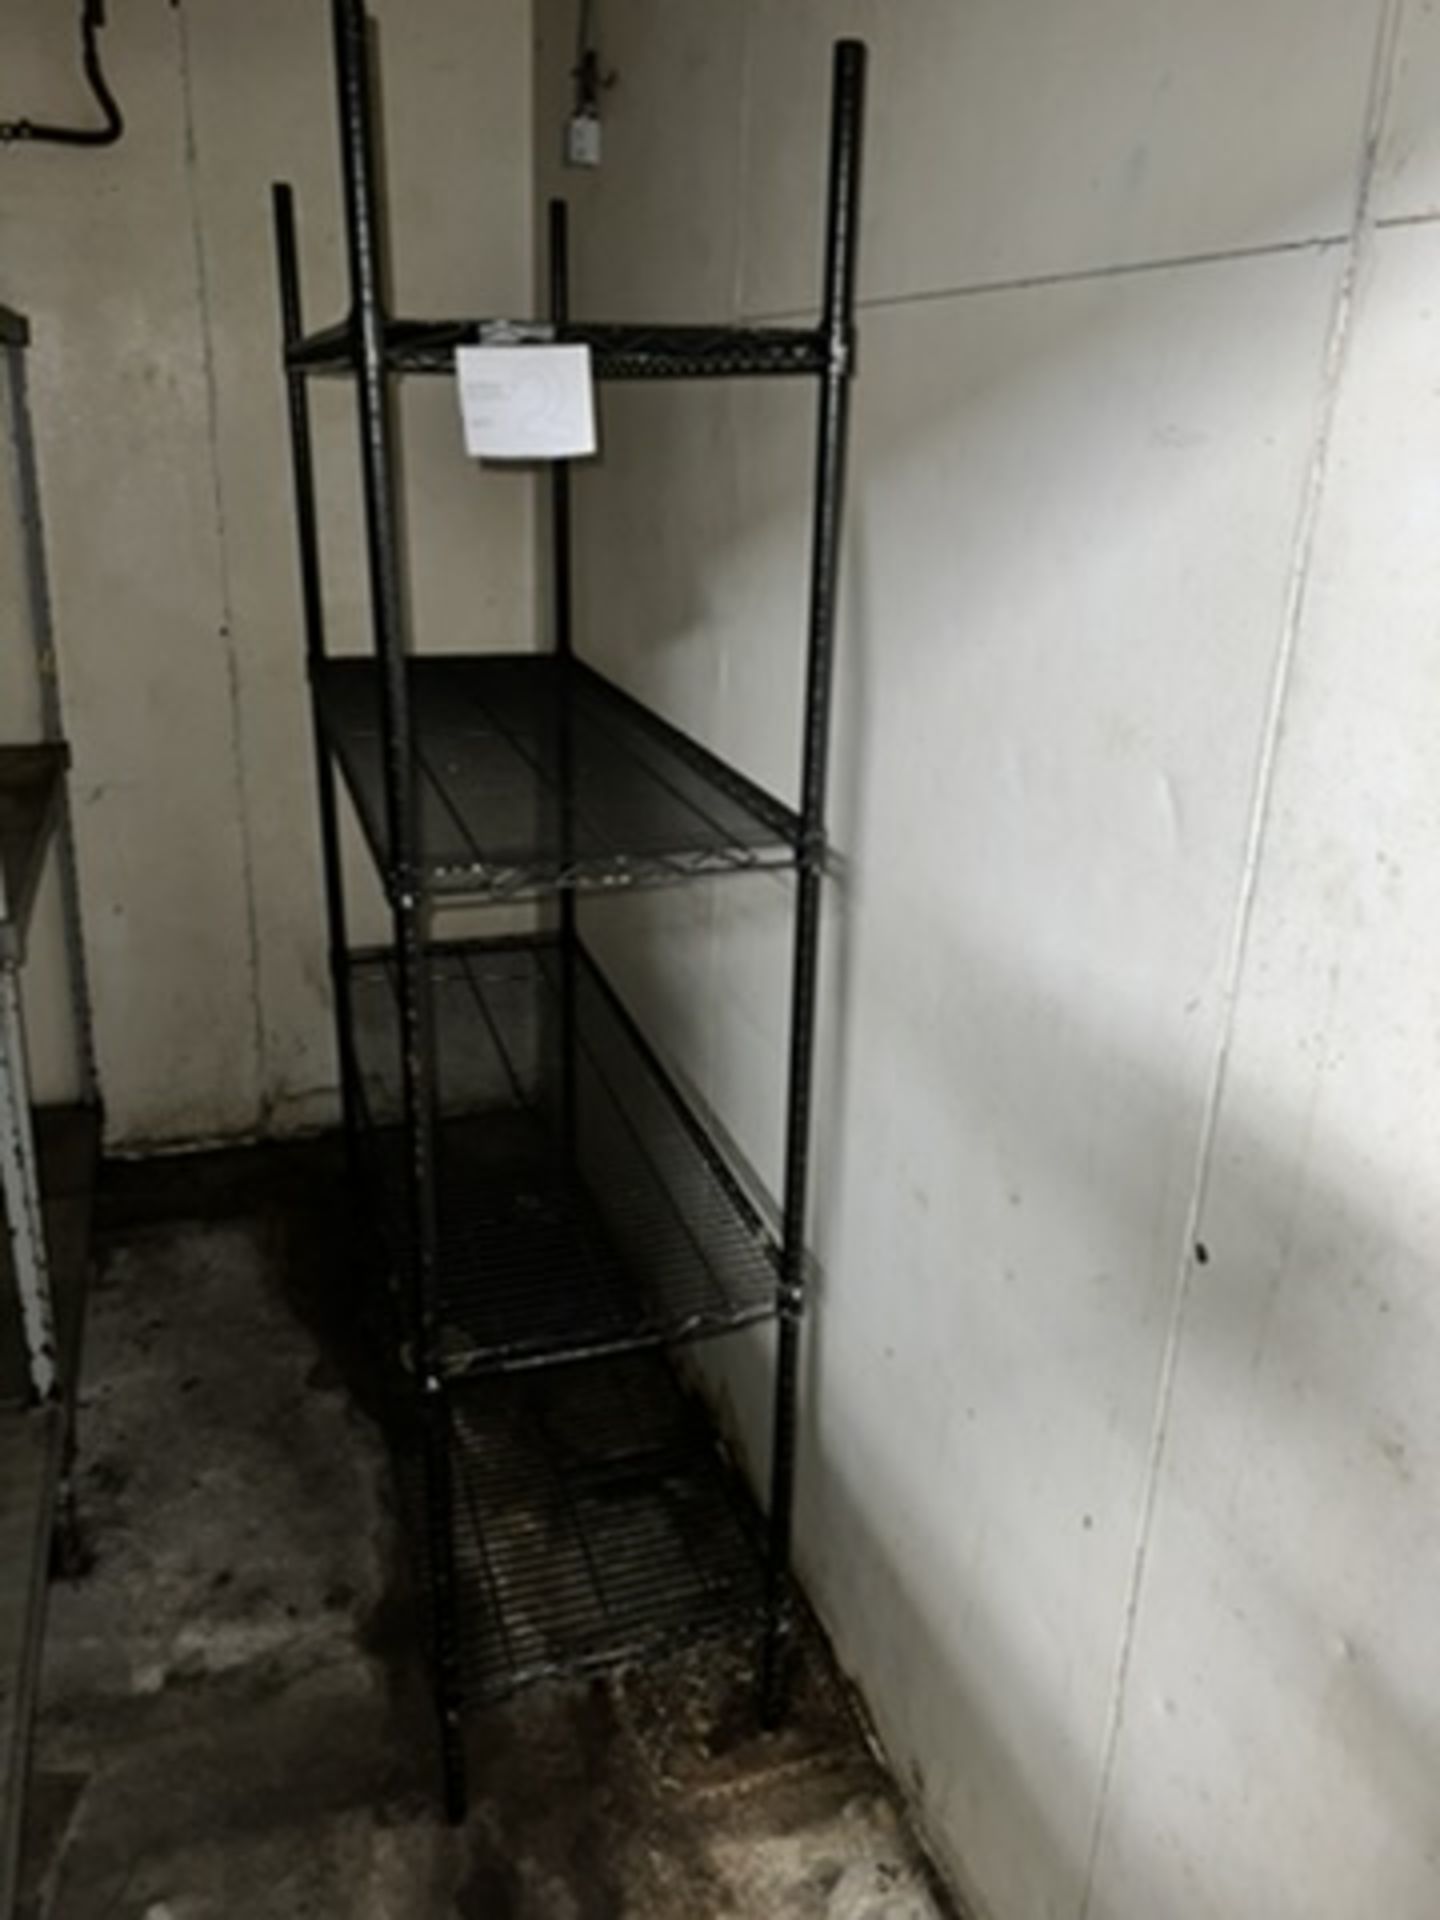 Black wire shelving unit, 4-tier, 4' wide - Image 3 of 3